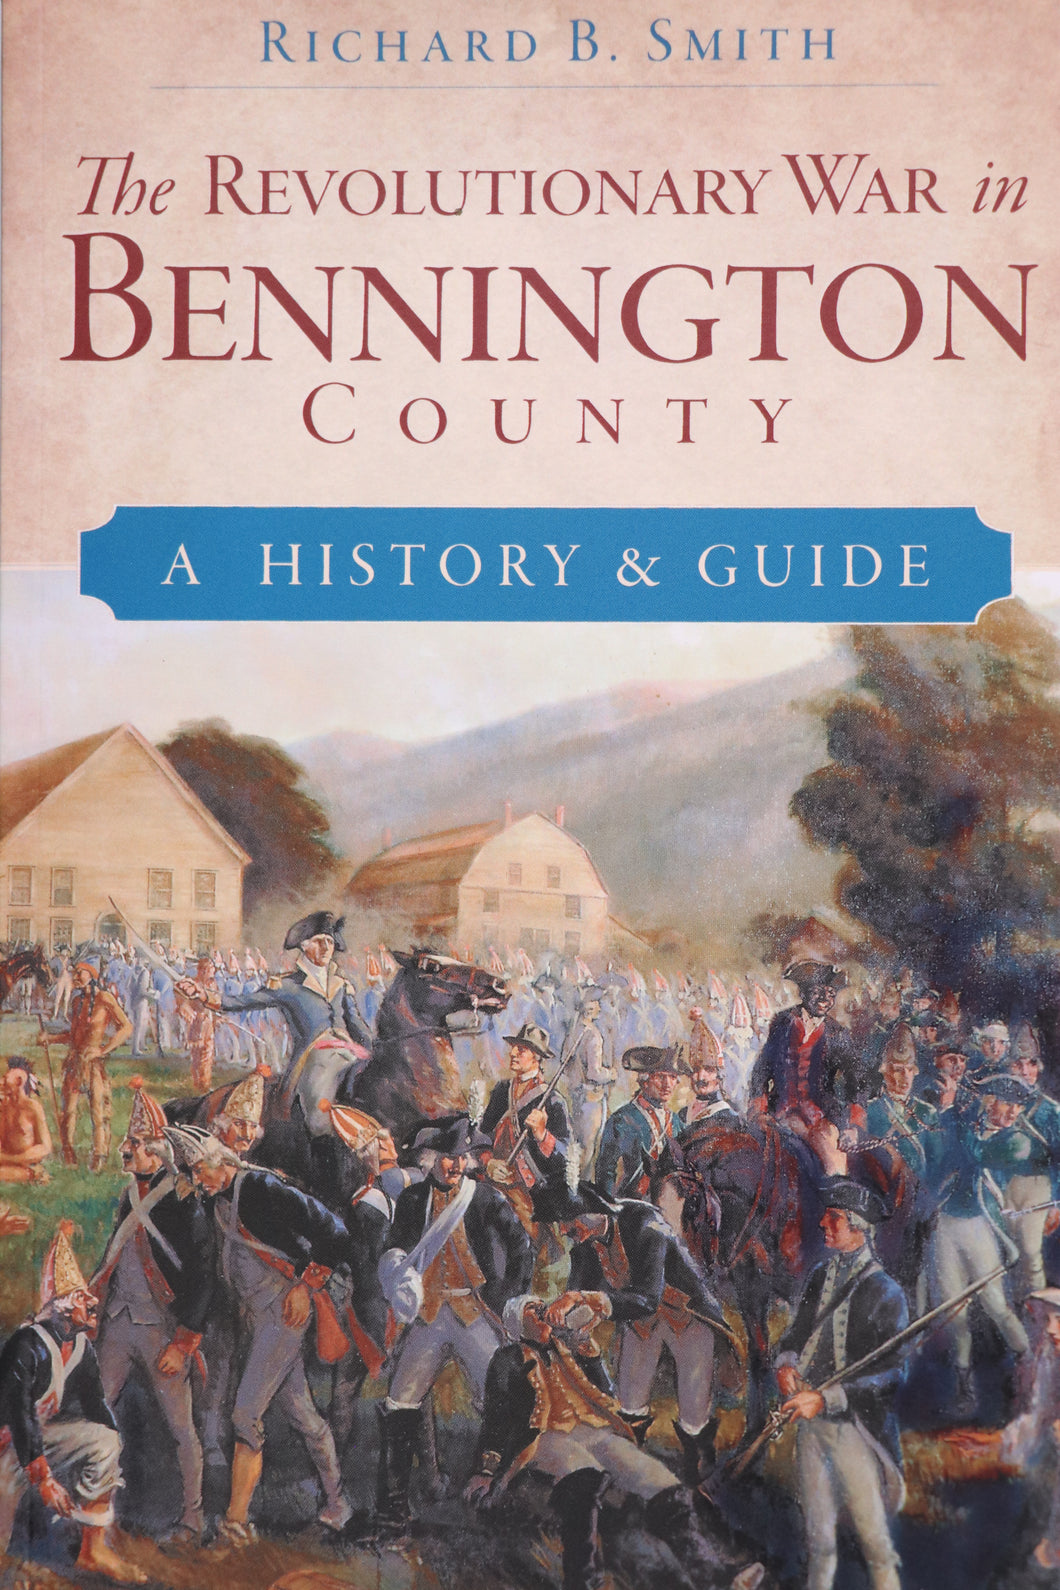 The Revolutionary War in Bennington County: A History & Guide